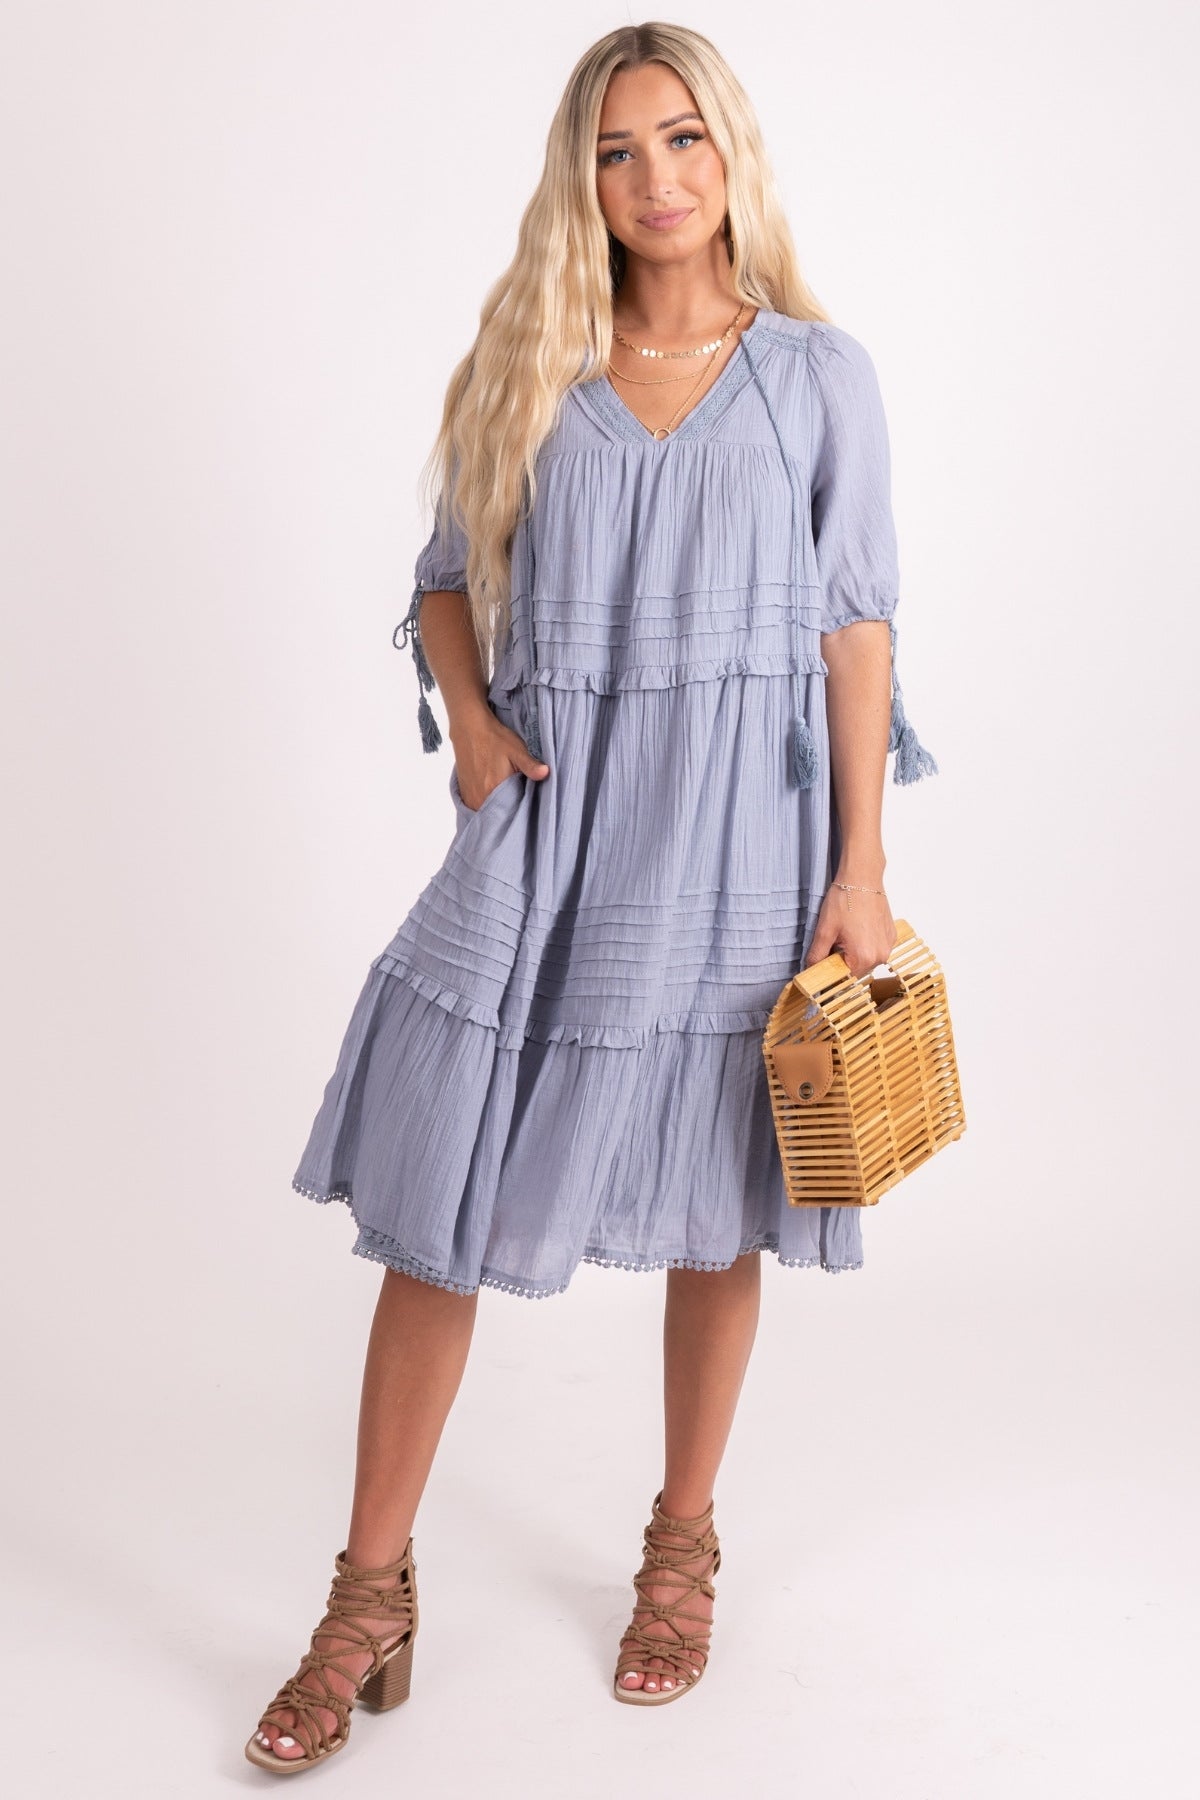 Dusty Blue Midi Dress with Boho Ties, Lace, and Ruffles for Women